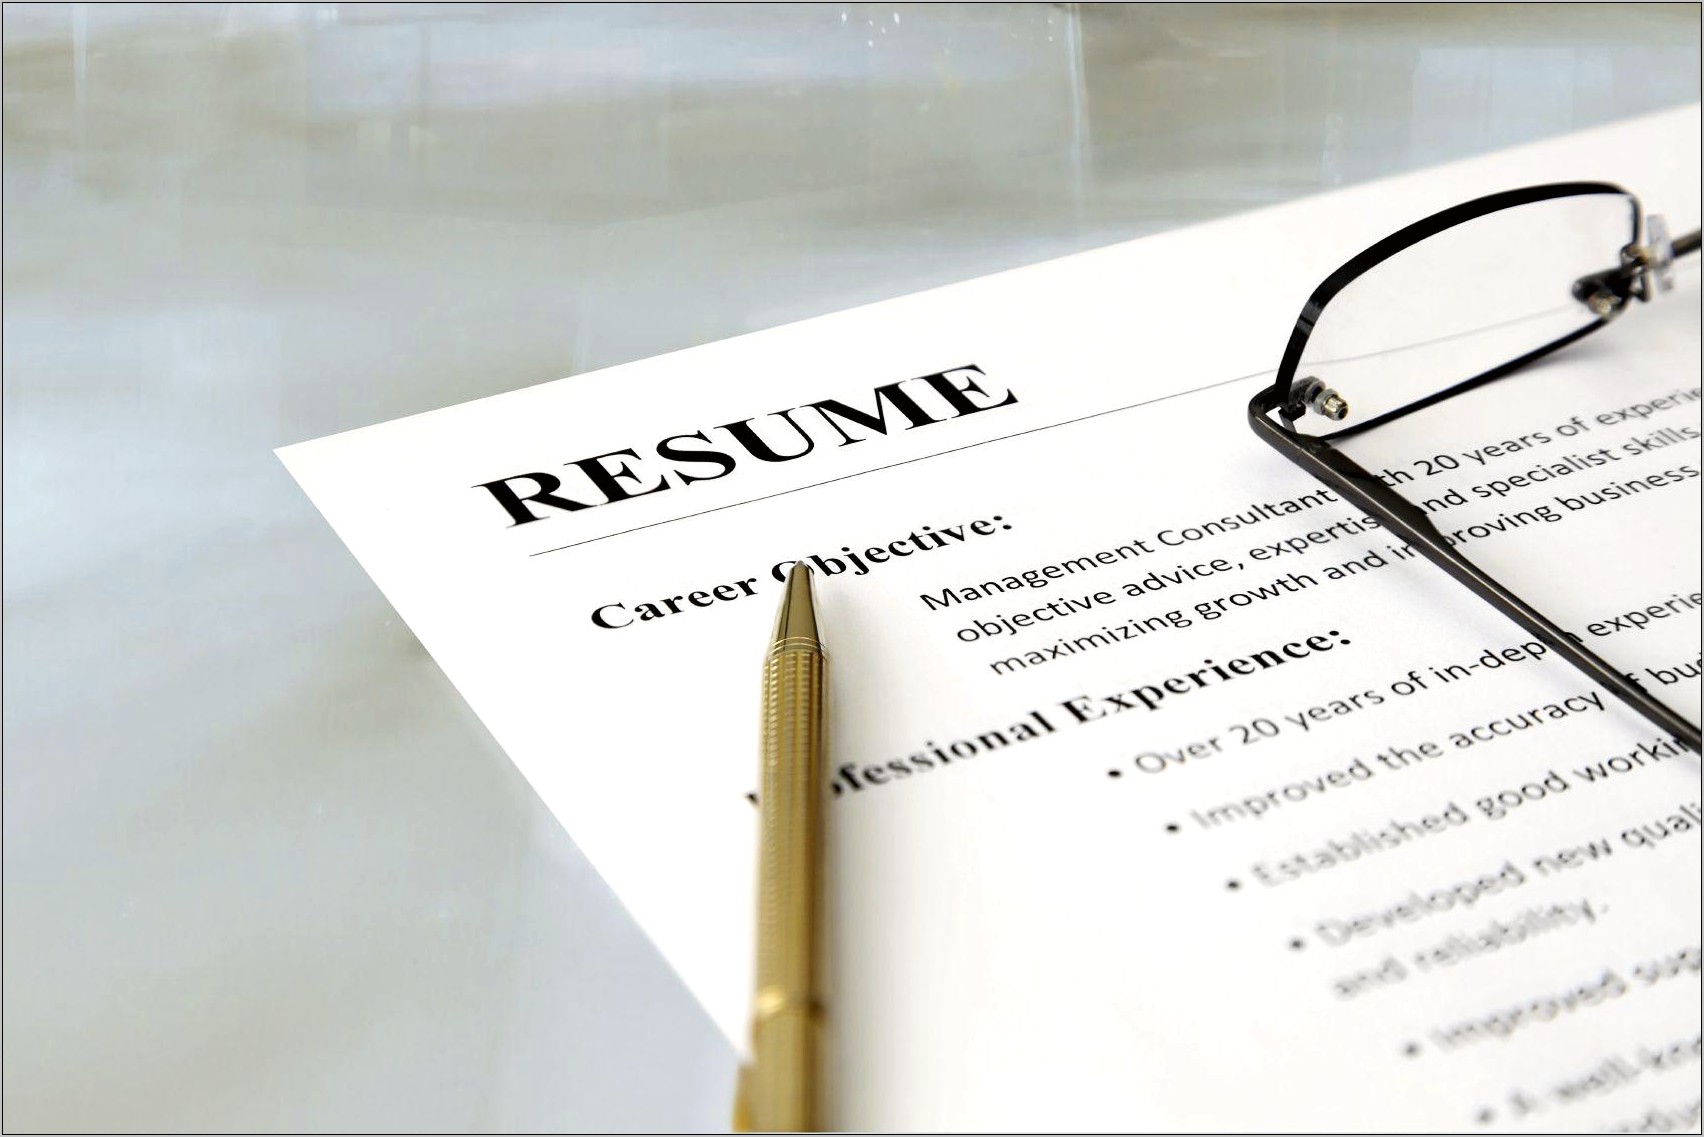 Resume Objective Examples For Law School